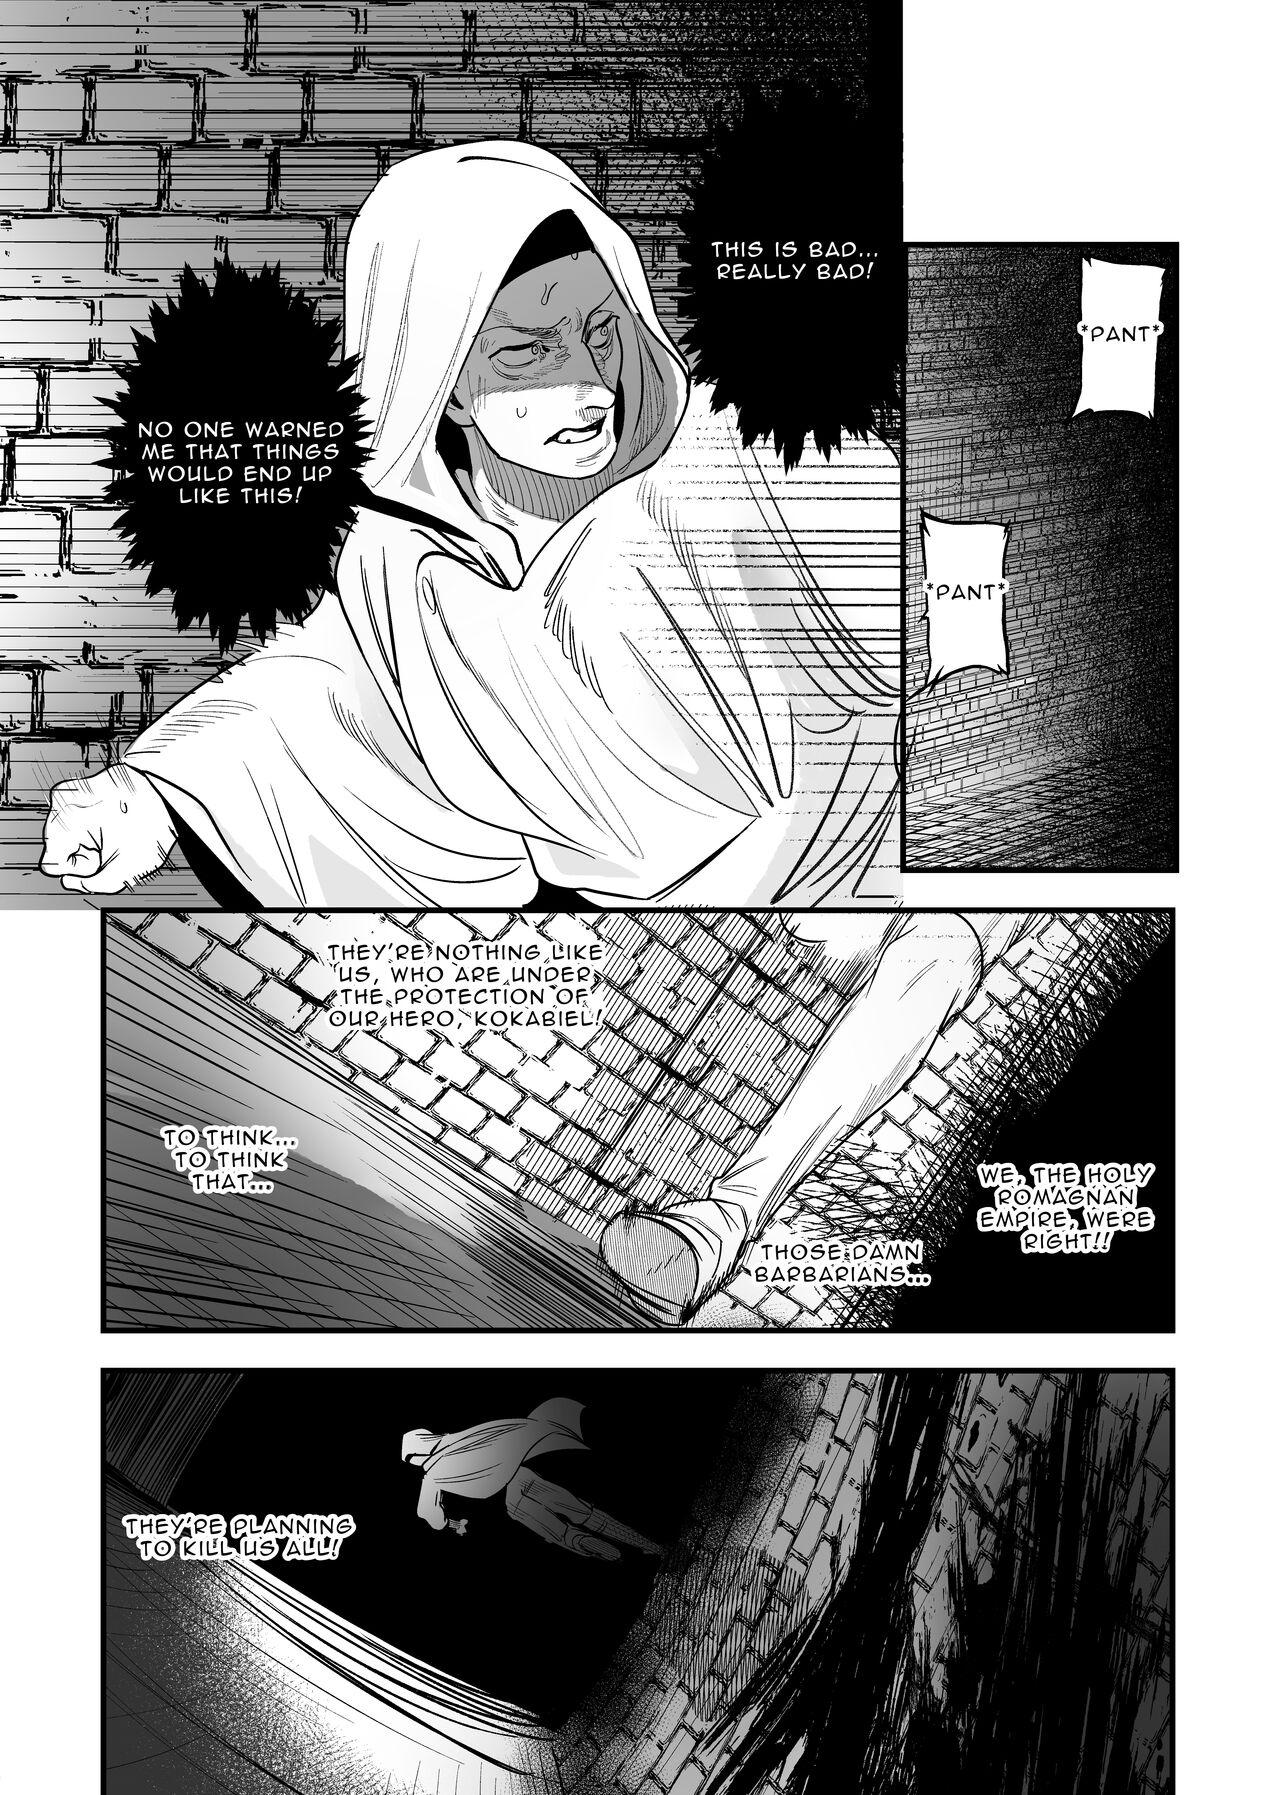 Lesbiansex The Man Who Saved Me on my Isekai Trip was a Killer... 2 - Original This - Page 3